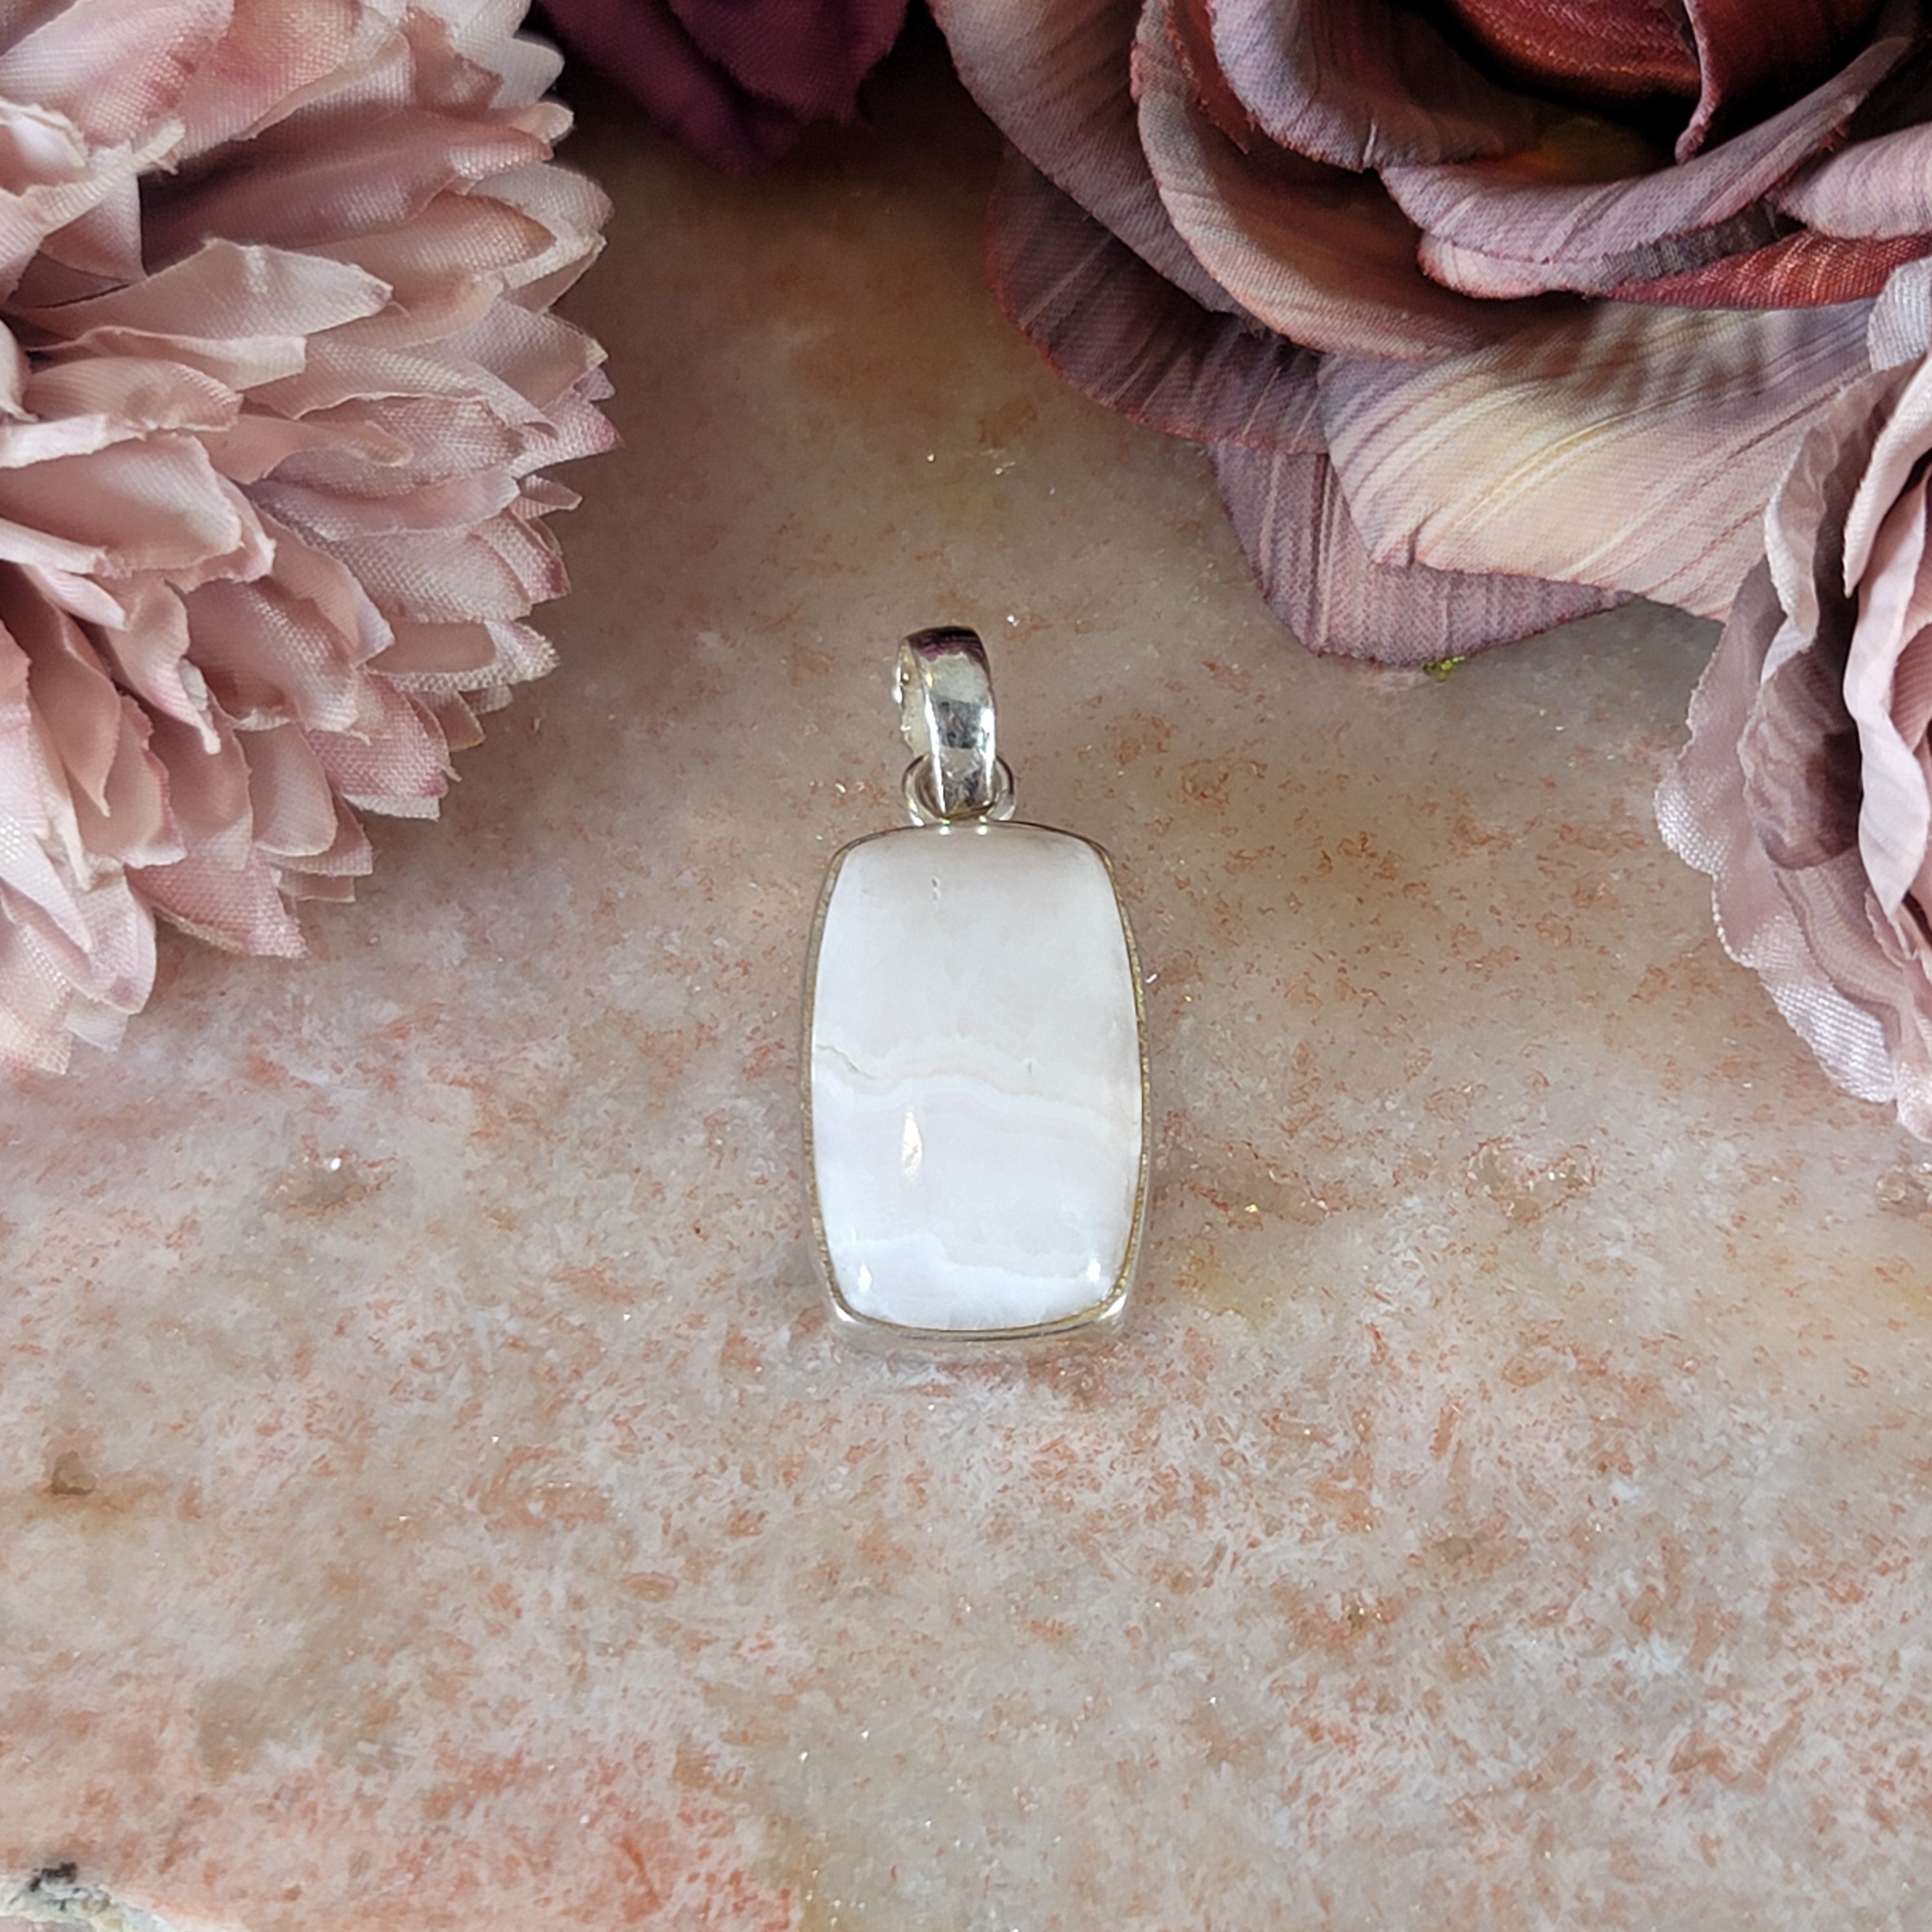 Pink Calcite Pendant .925 Silver for Compassion, Conflict Resolution and Emotional Healing